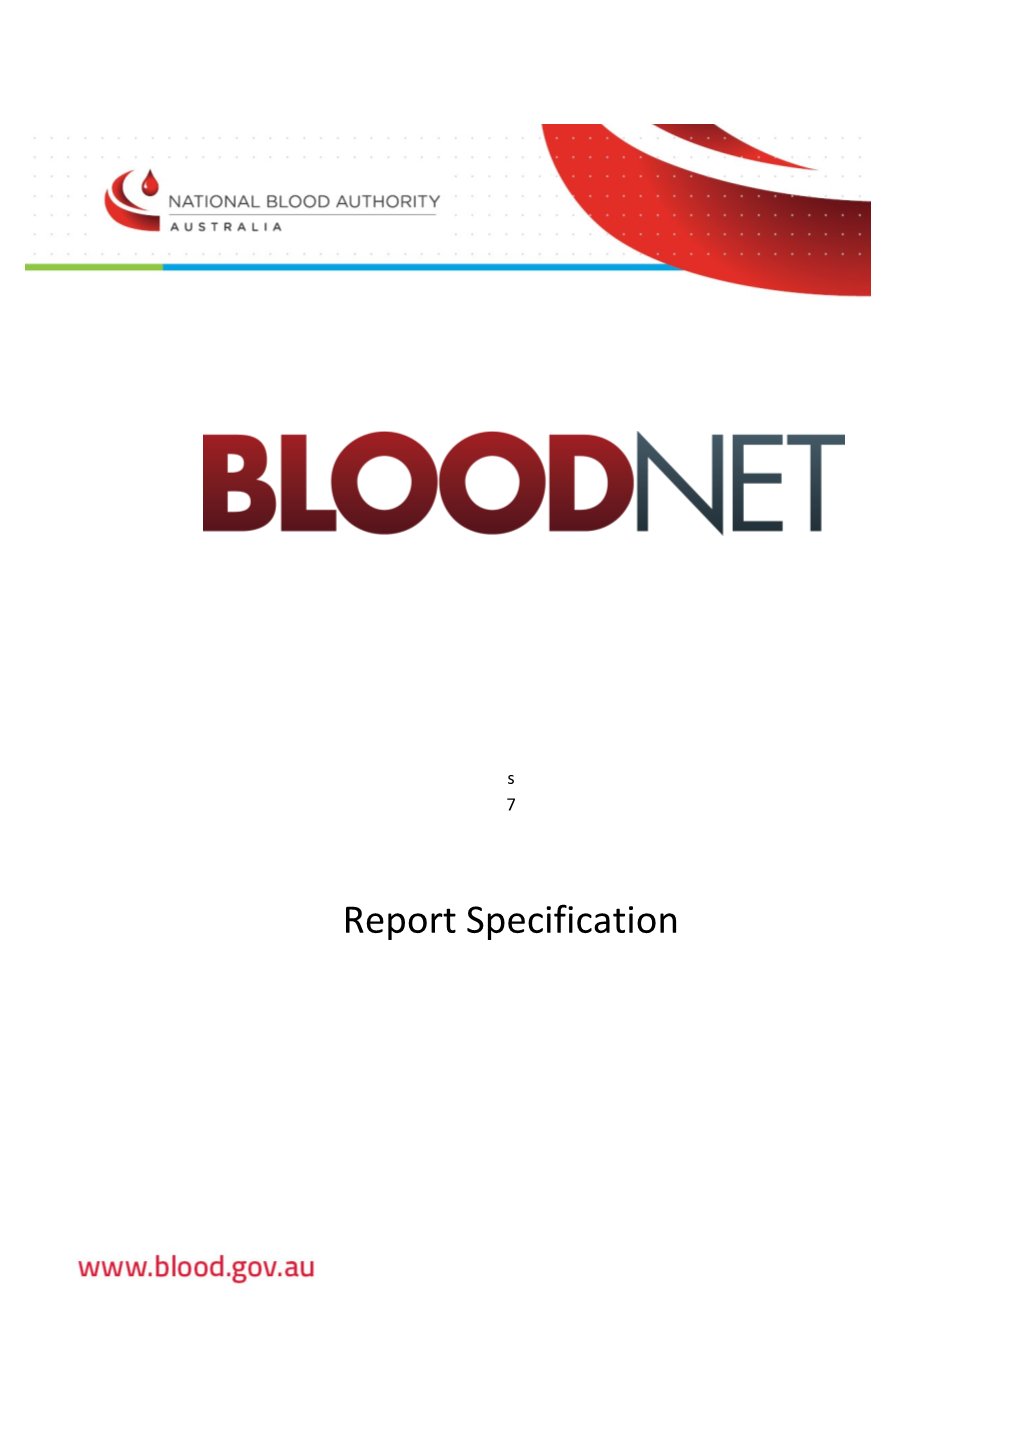 Bloodnet - Fresh Component Health Provider Discard Report FATE007